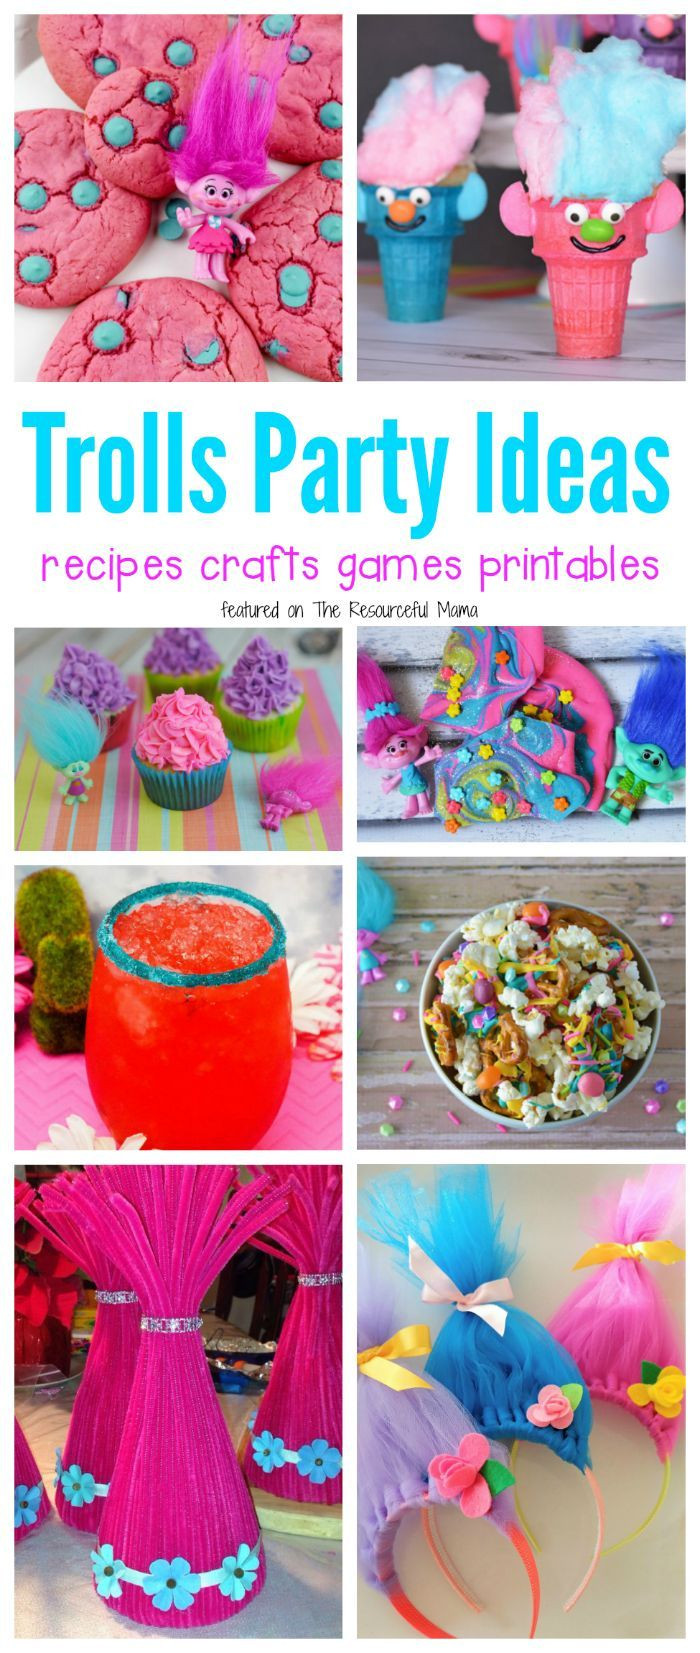 Trolls Bday Party Ideas
 77 best images about Trolls on Pinterest